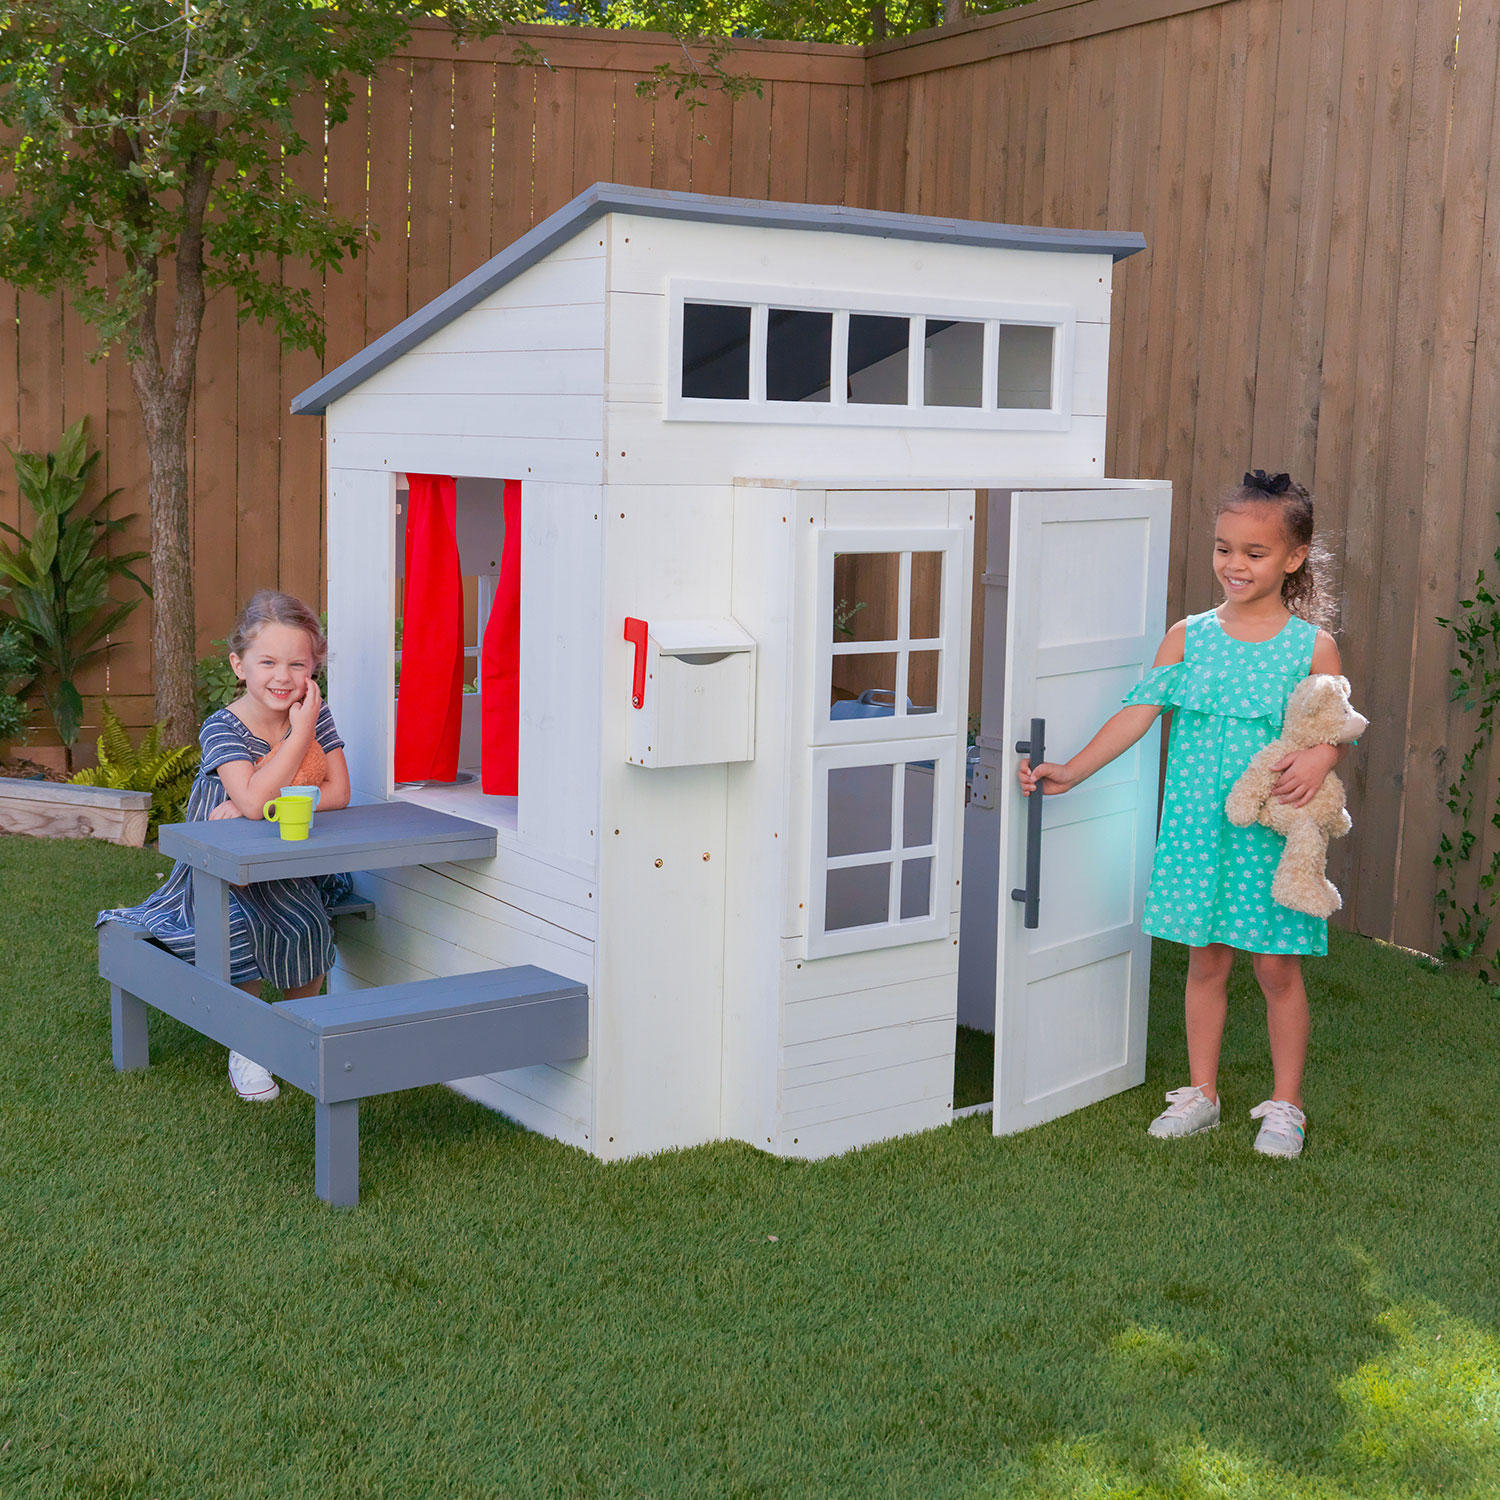 KidKraft Modern Outdoor Wooden Playhouse with Picnic Table, Mailbox and Outdoor Grill